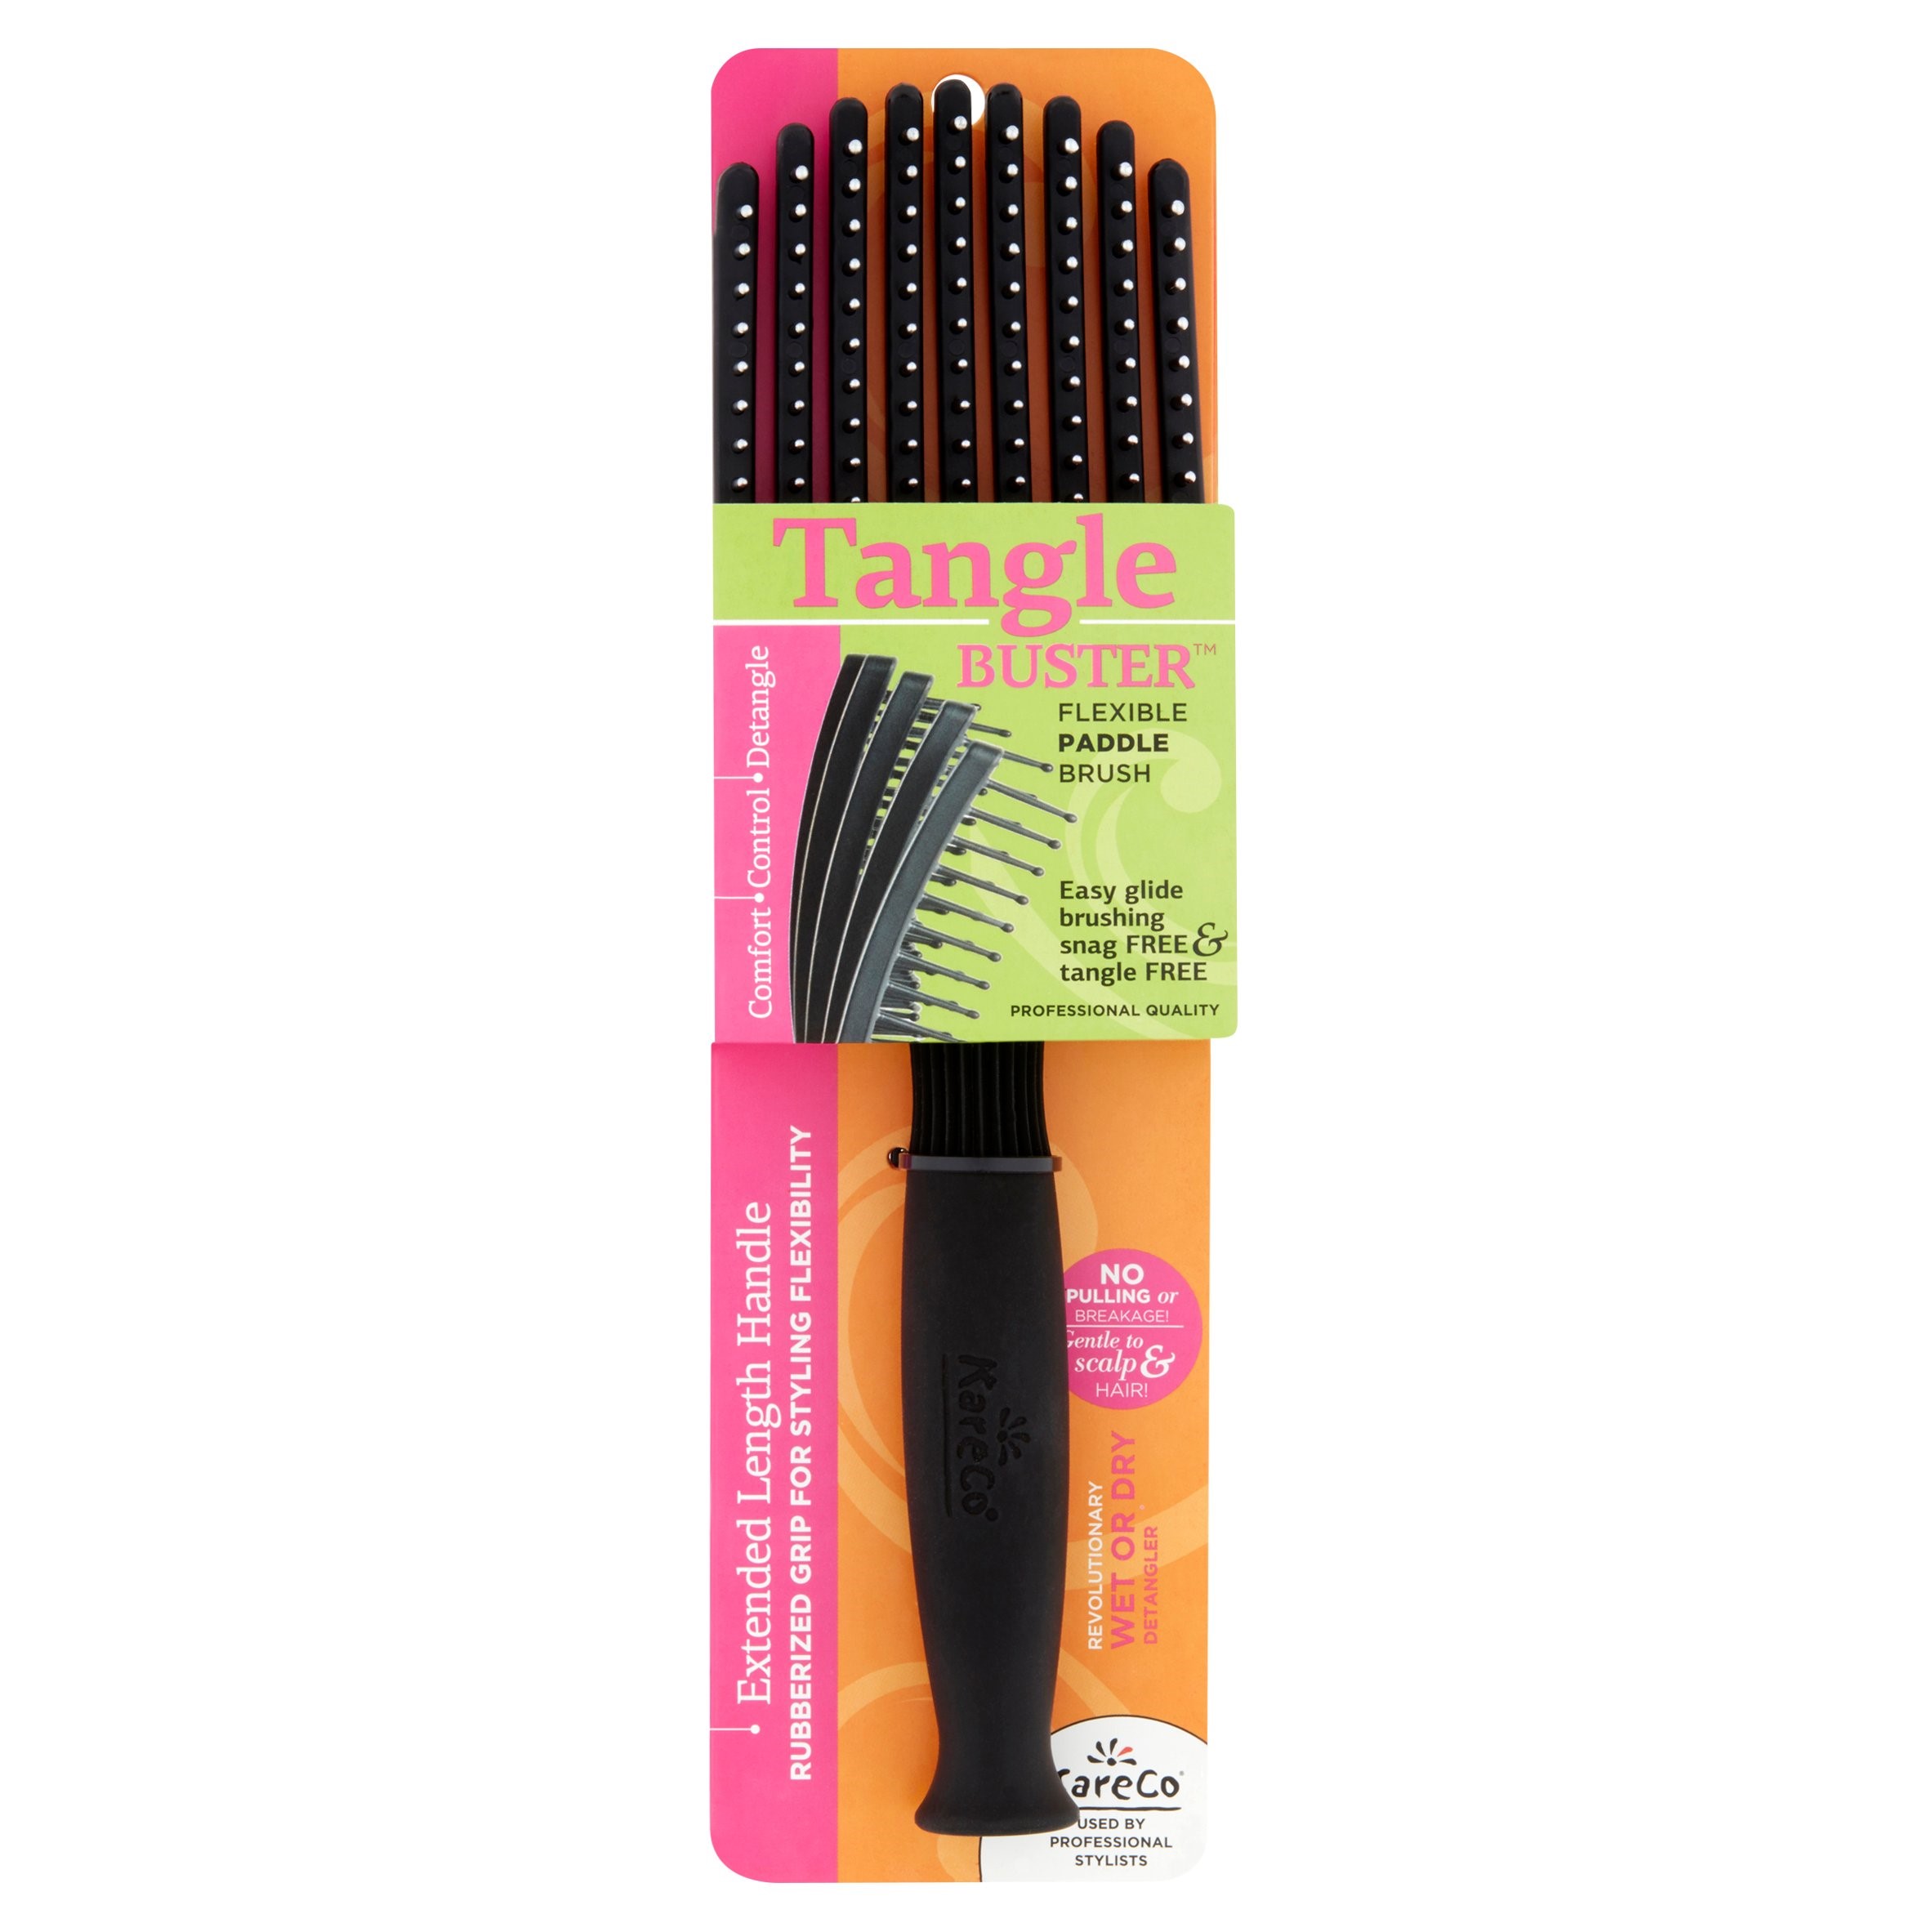 The KareCo's Tangle Buster Brush travel product recommended by Erika Klein on Lifney.